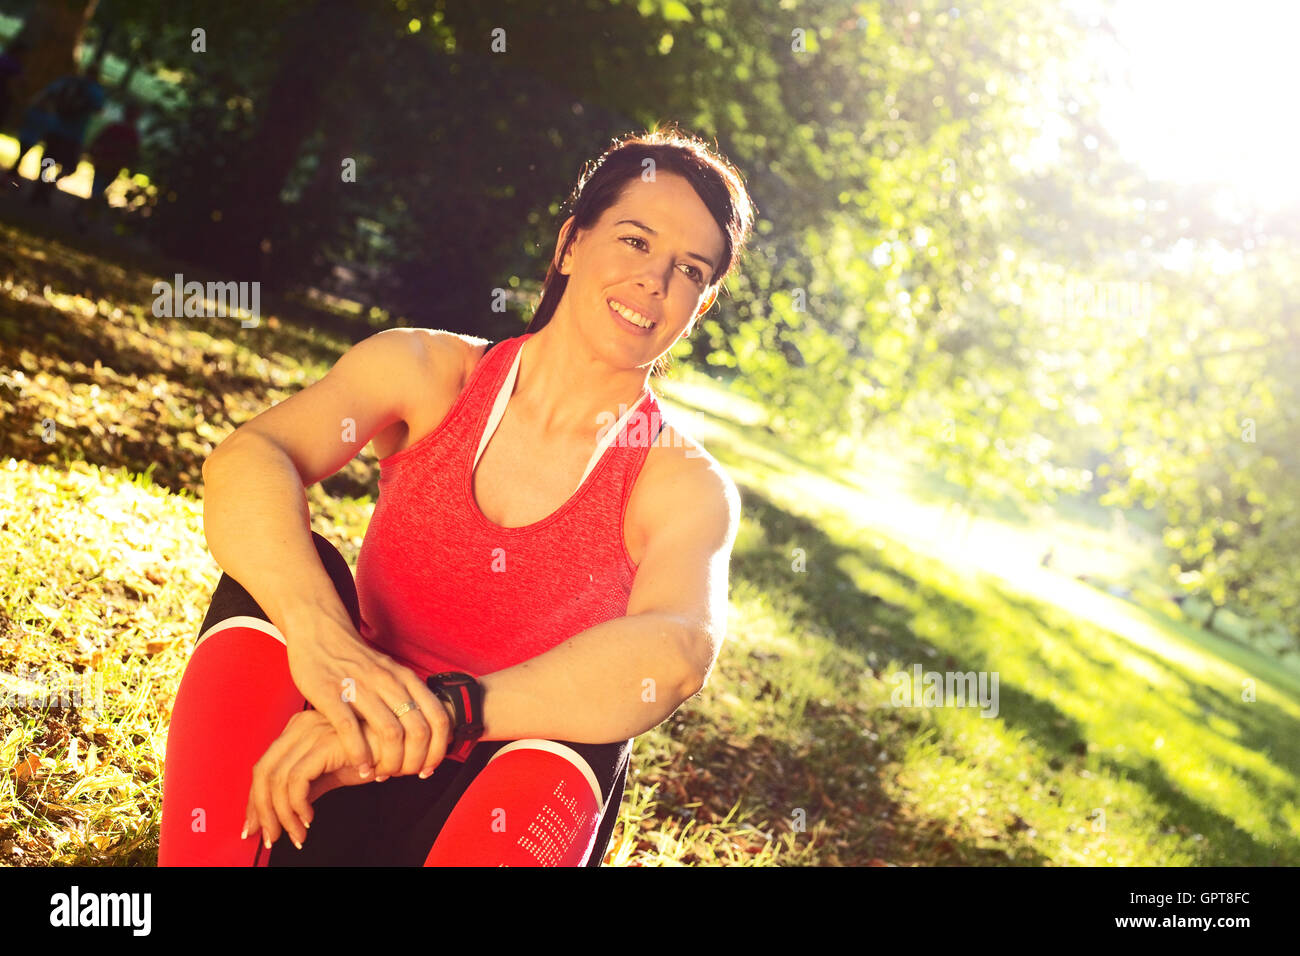 portrait of a fitness woman relaxing after exercise Stock Photo